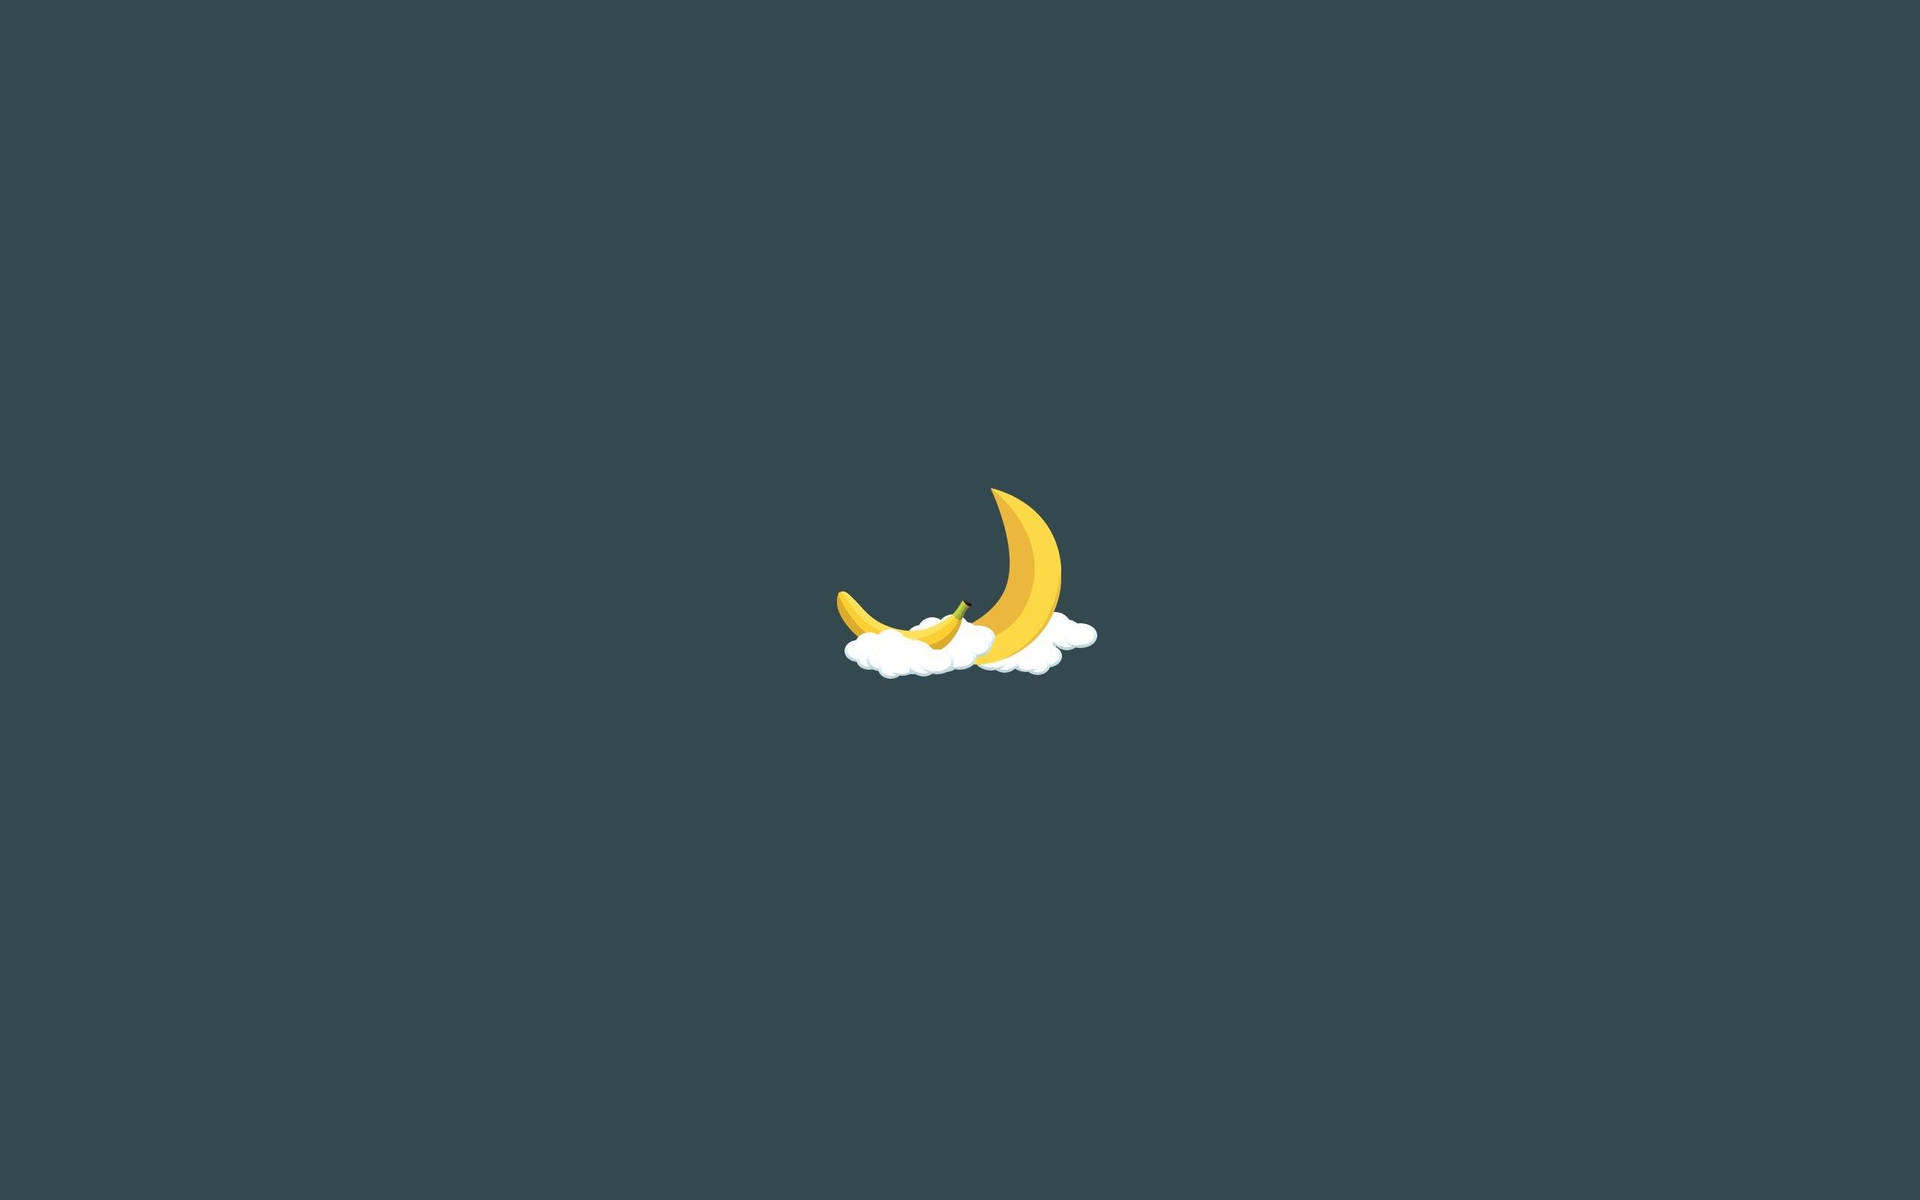 Simple Clean Banana Moon Background